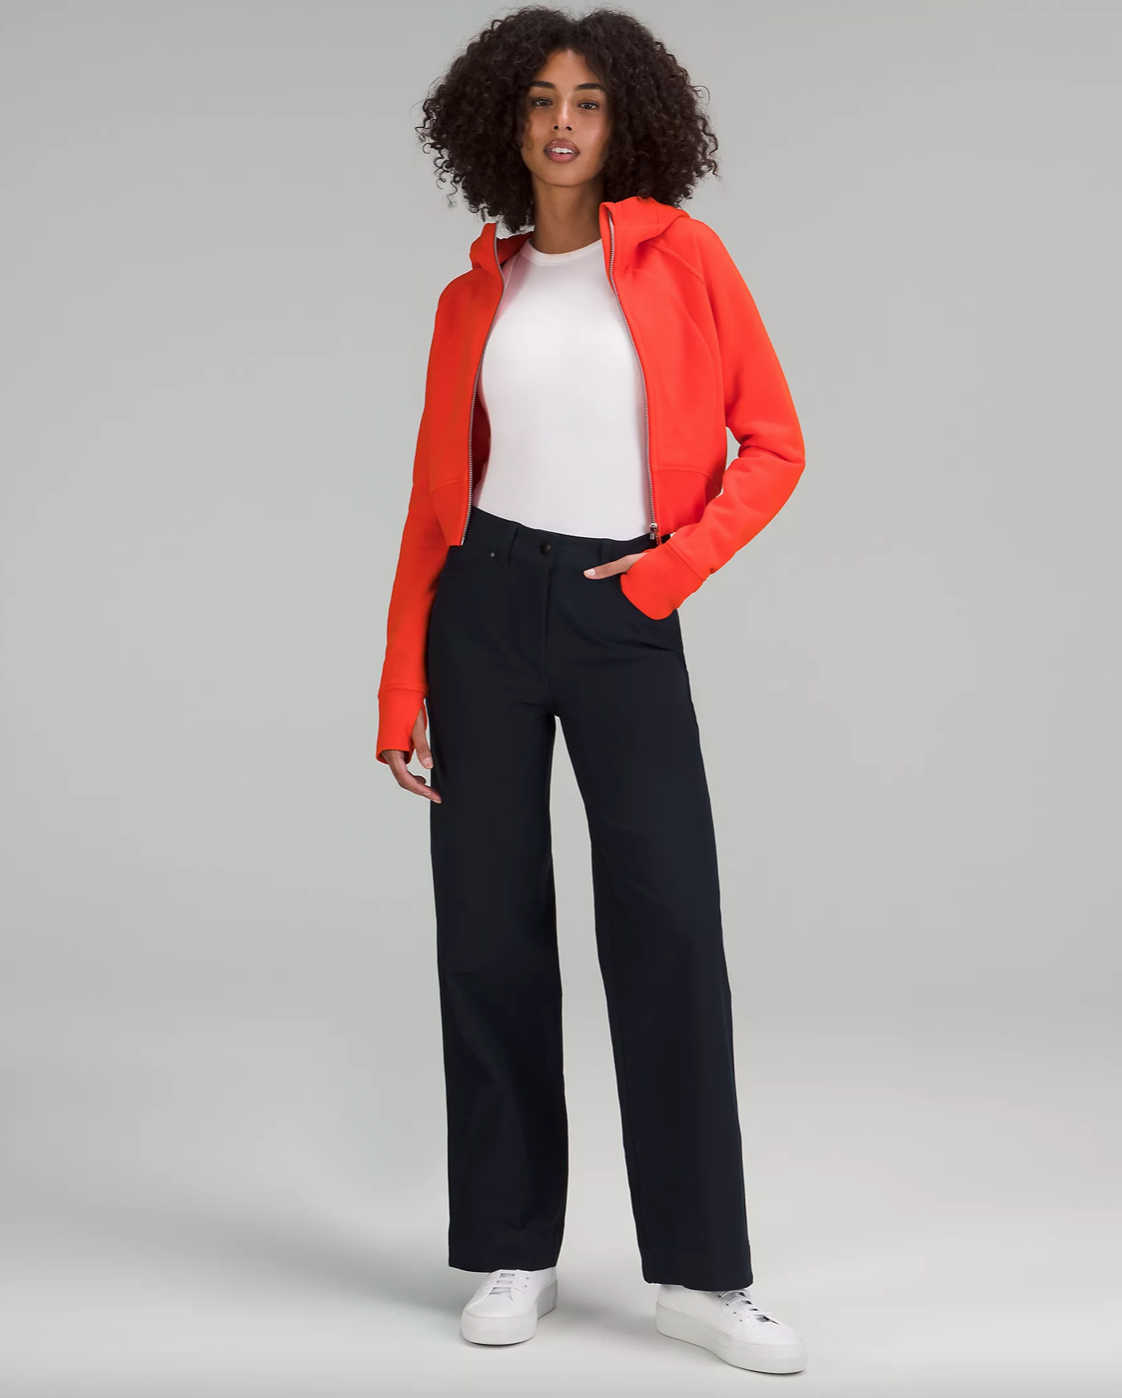 The 12 Best Travel Pants for Women of 2023 Tested and Reviewed